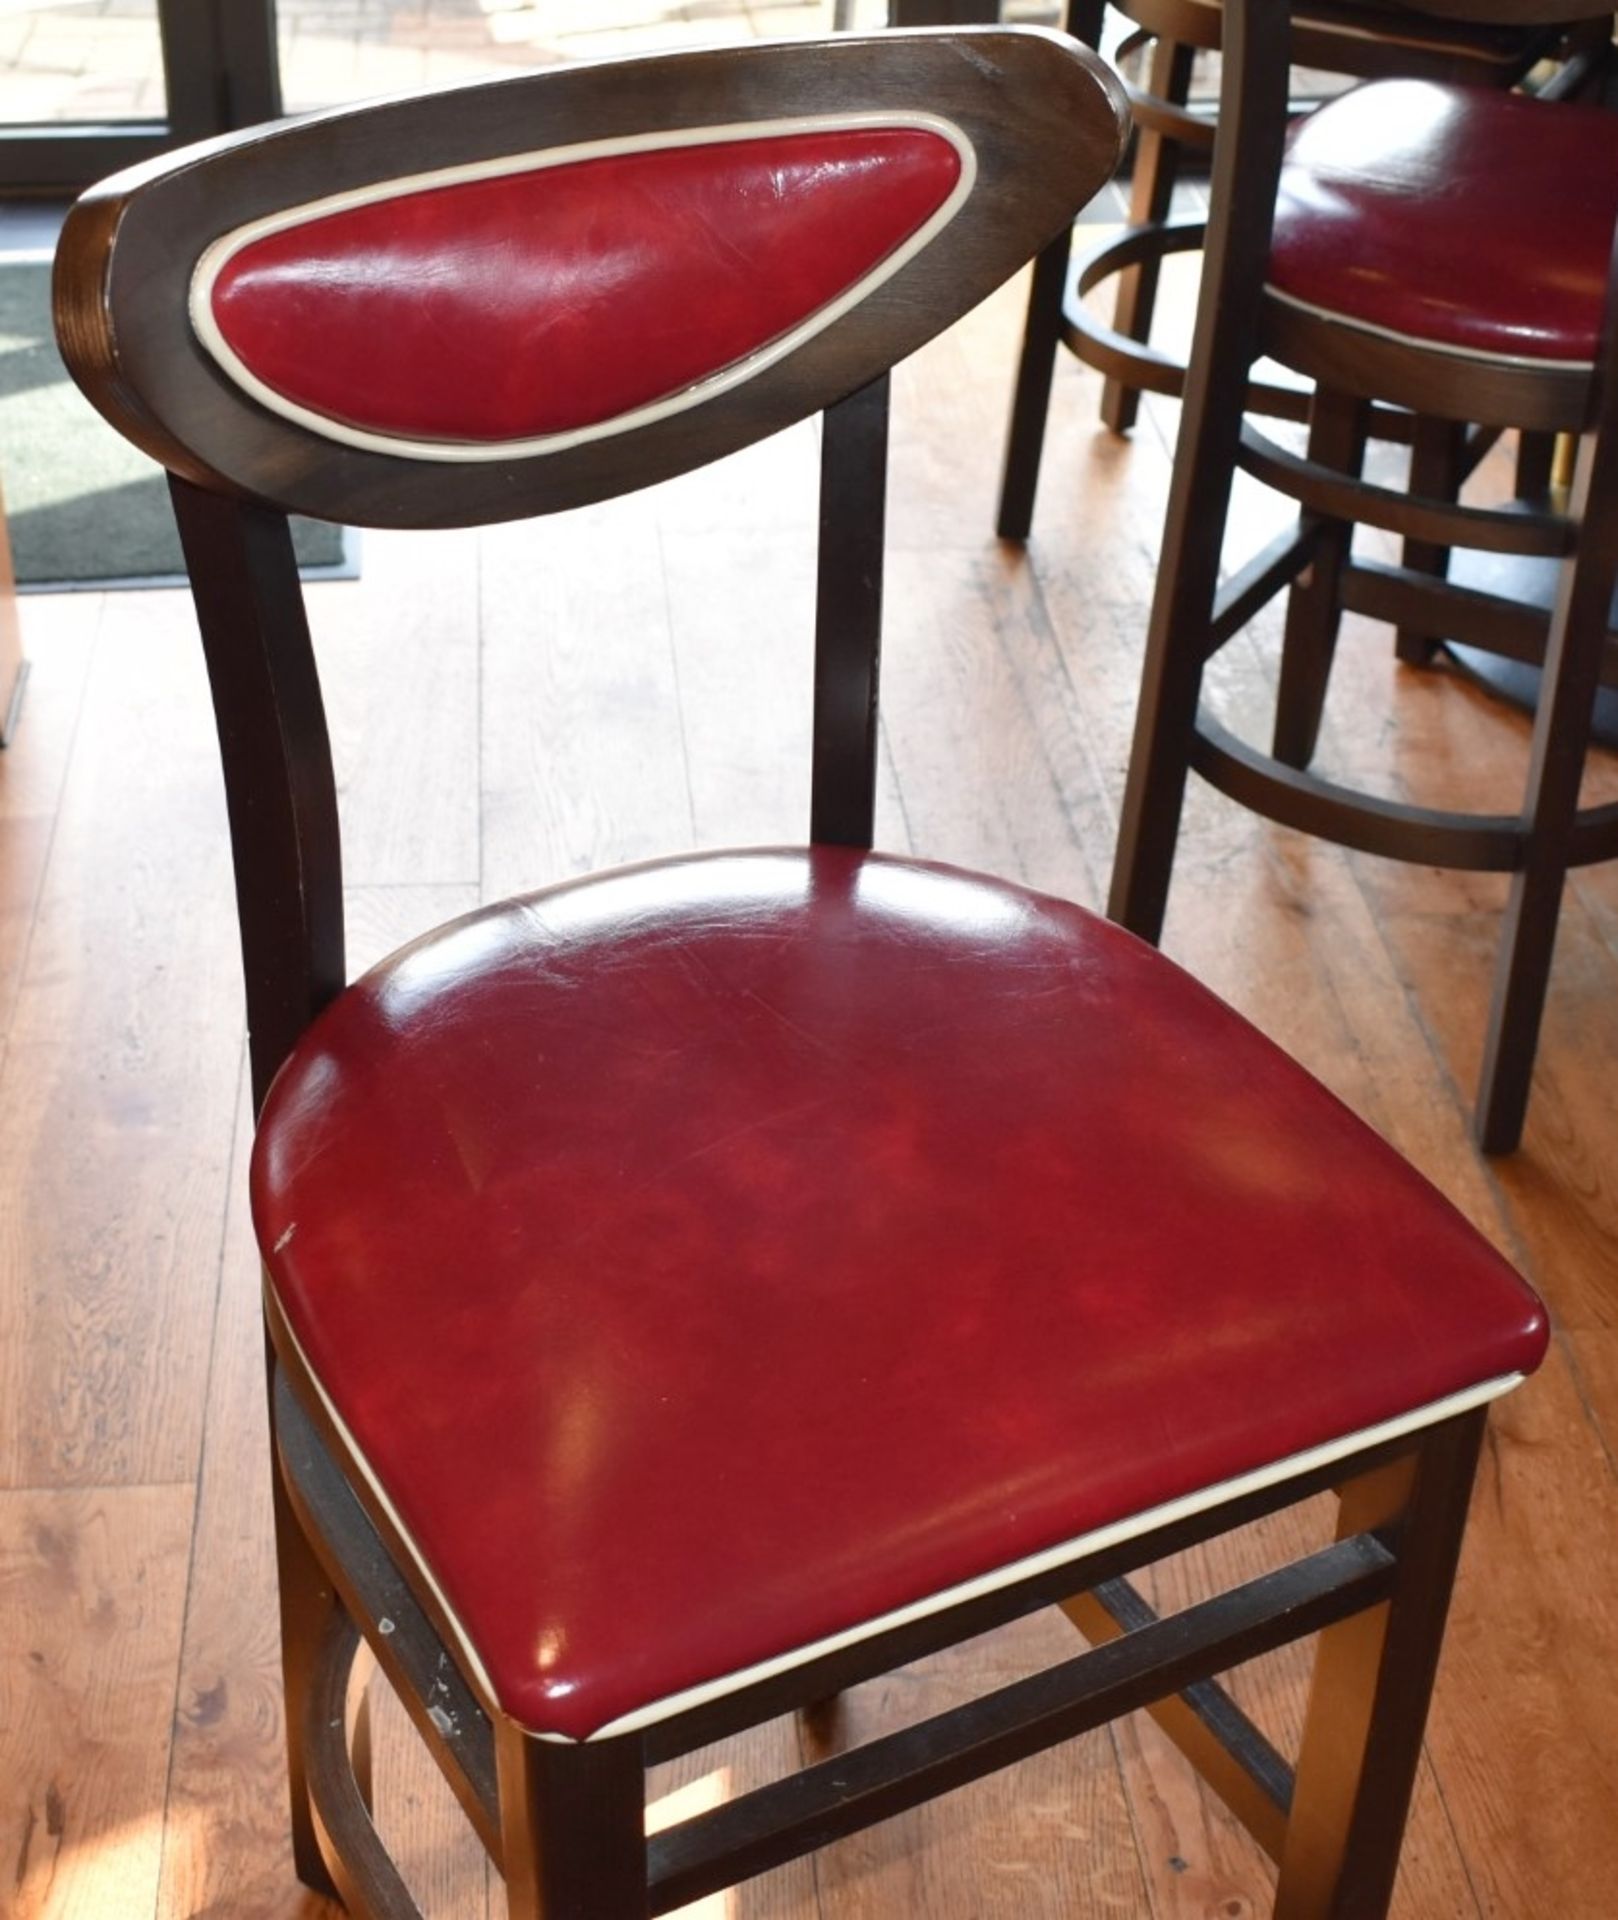 4 x Wine Red Faux Leather Bar Stools From Italian American Restaurant - Retro Design With Dark - Image 2 of 5